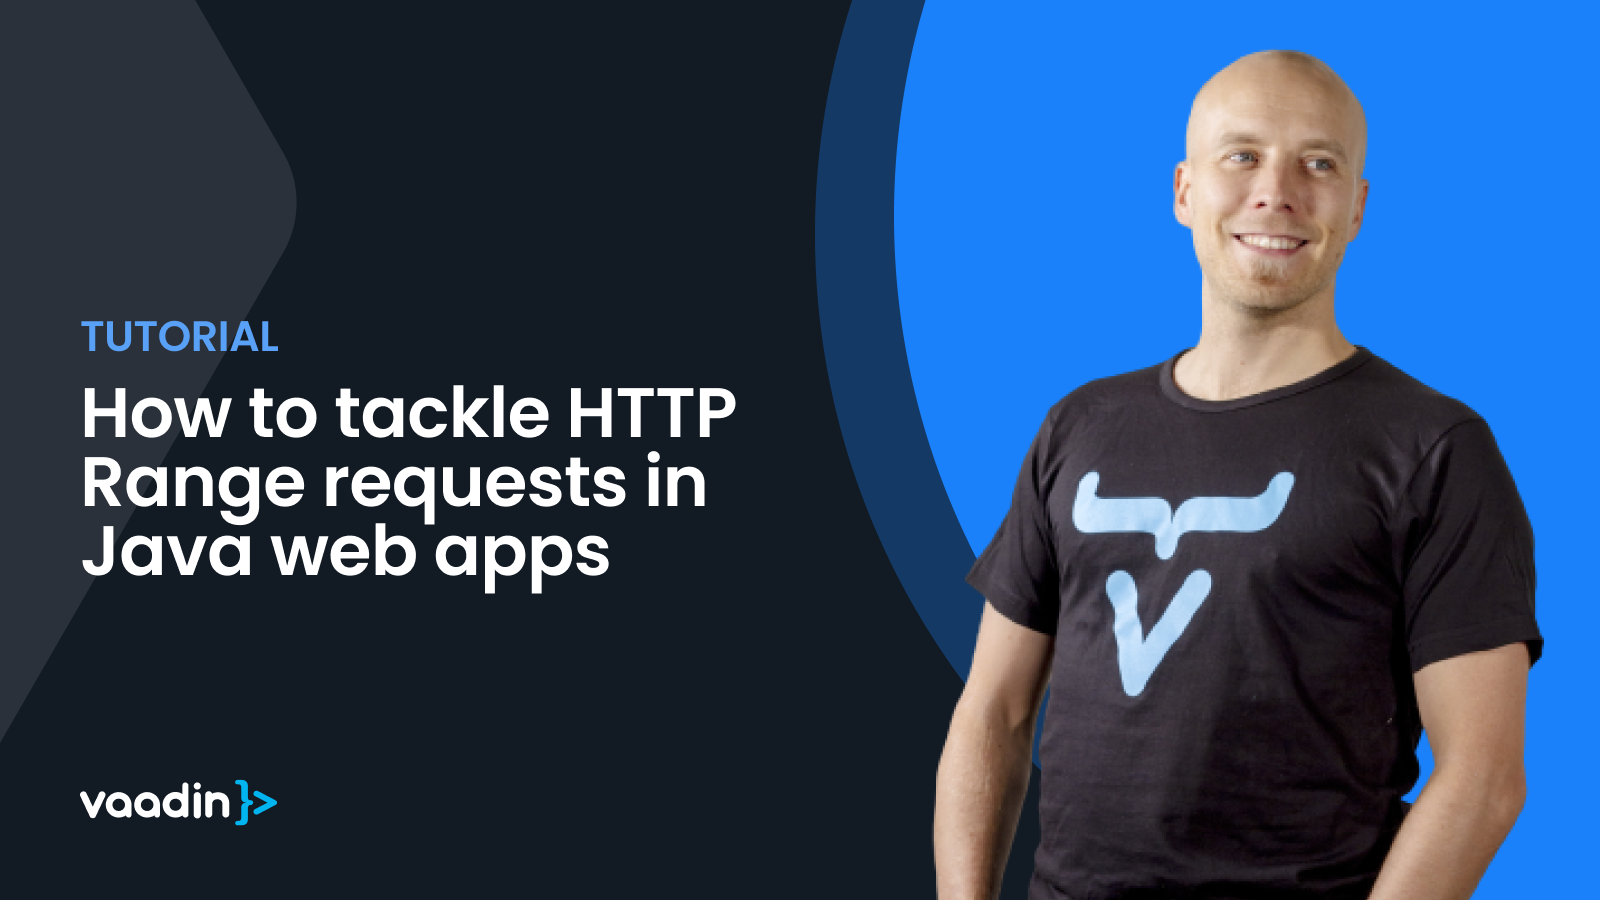 Learn how to tackle HTTP range requests in Java web apps.